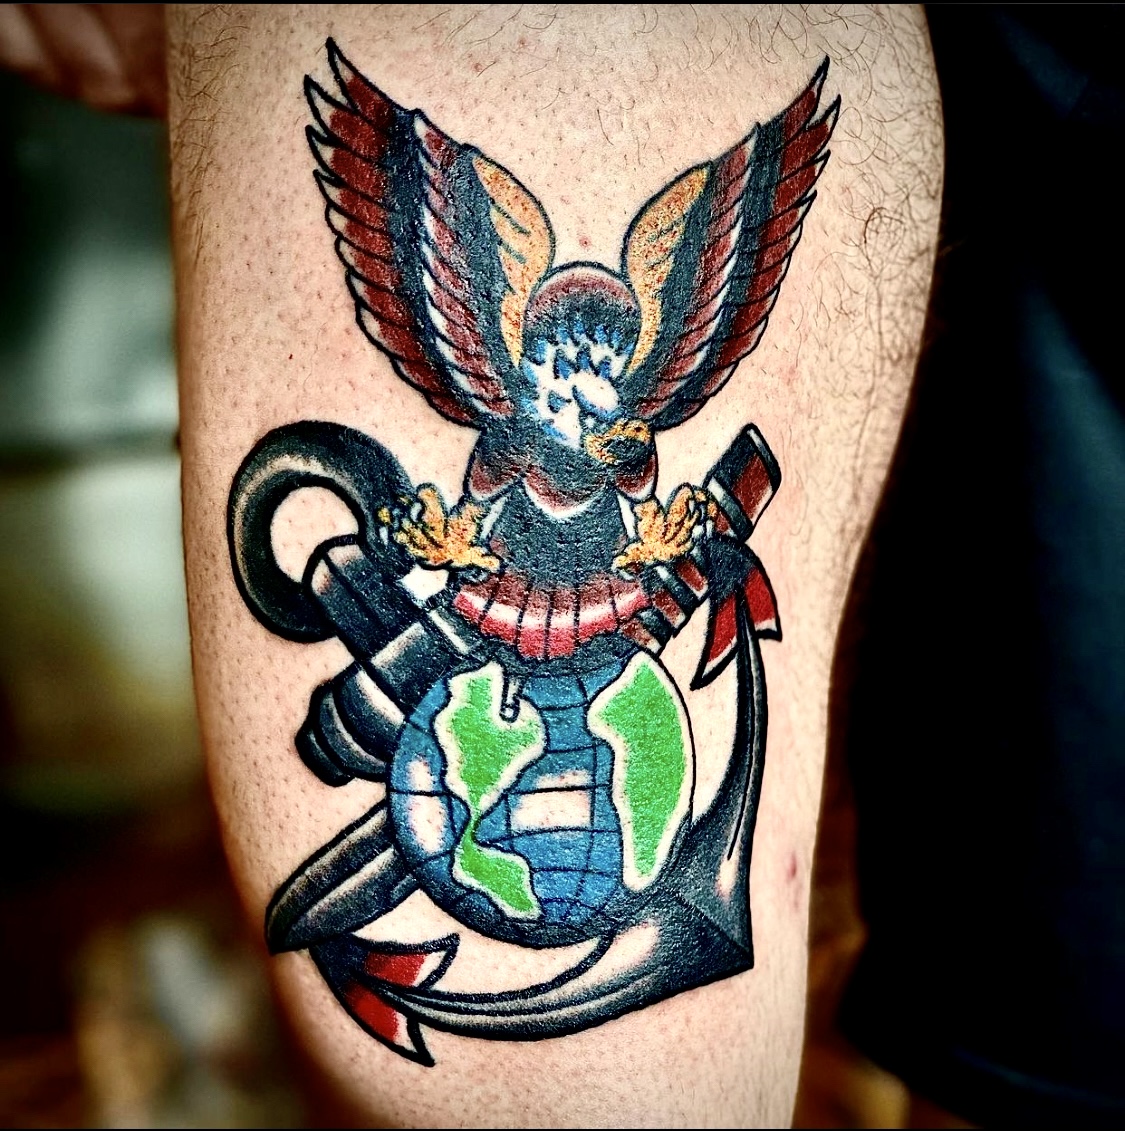 tattoo of an anchor and an eagle from dallas tattoo artist